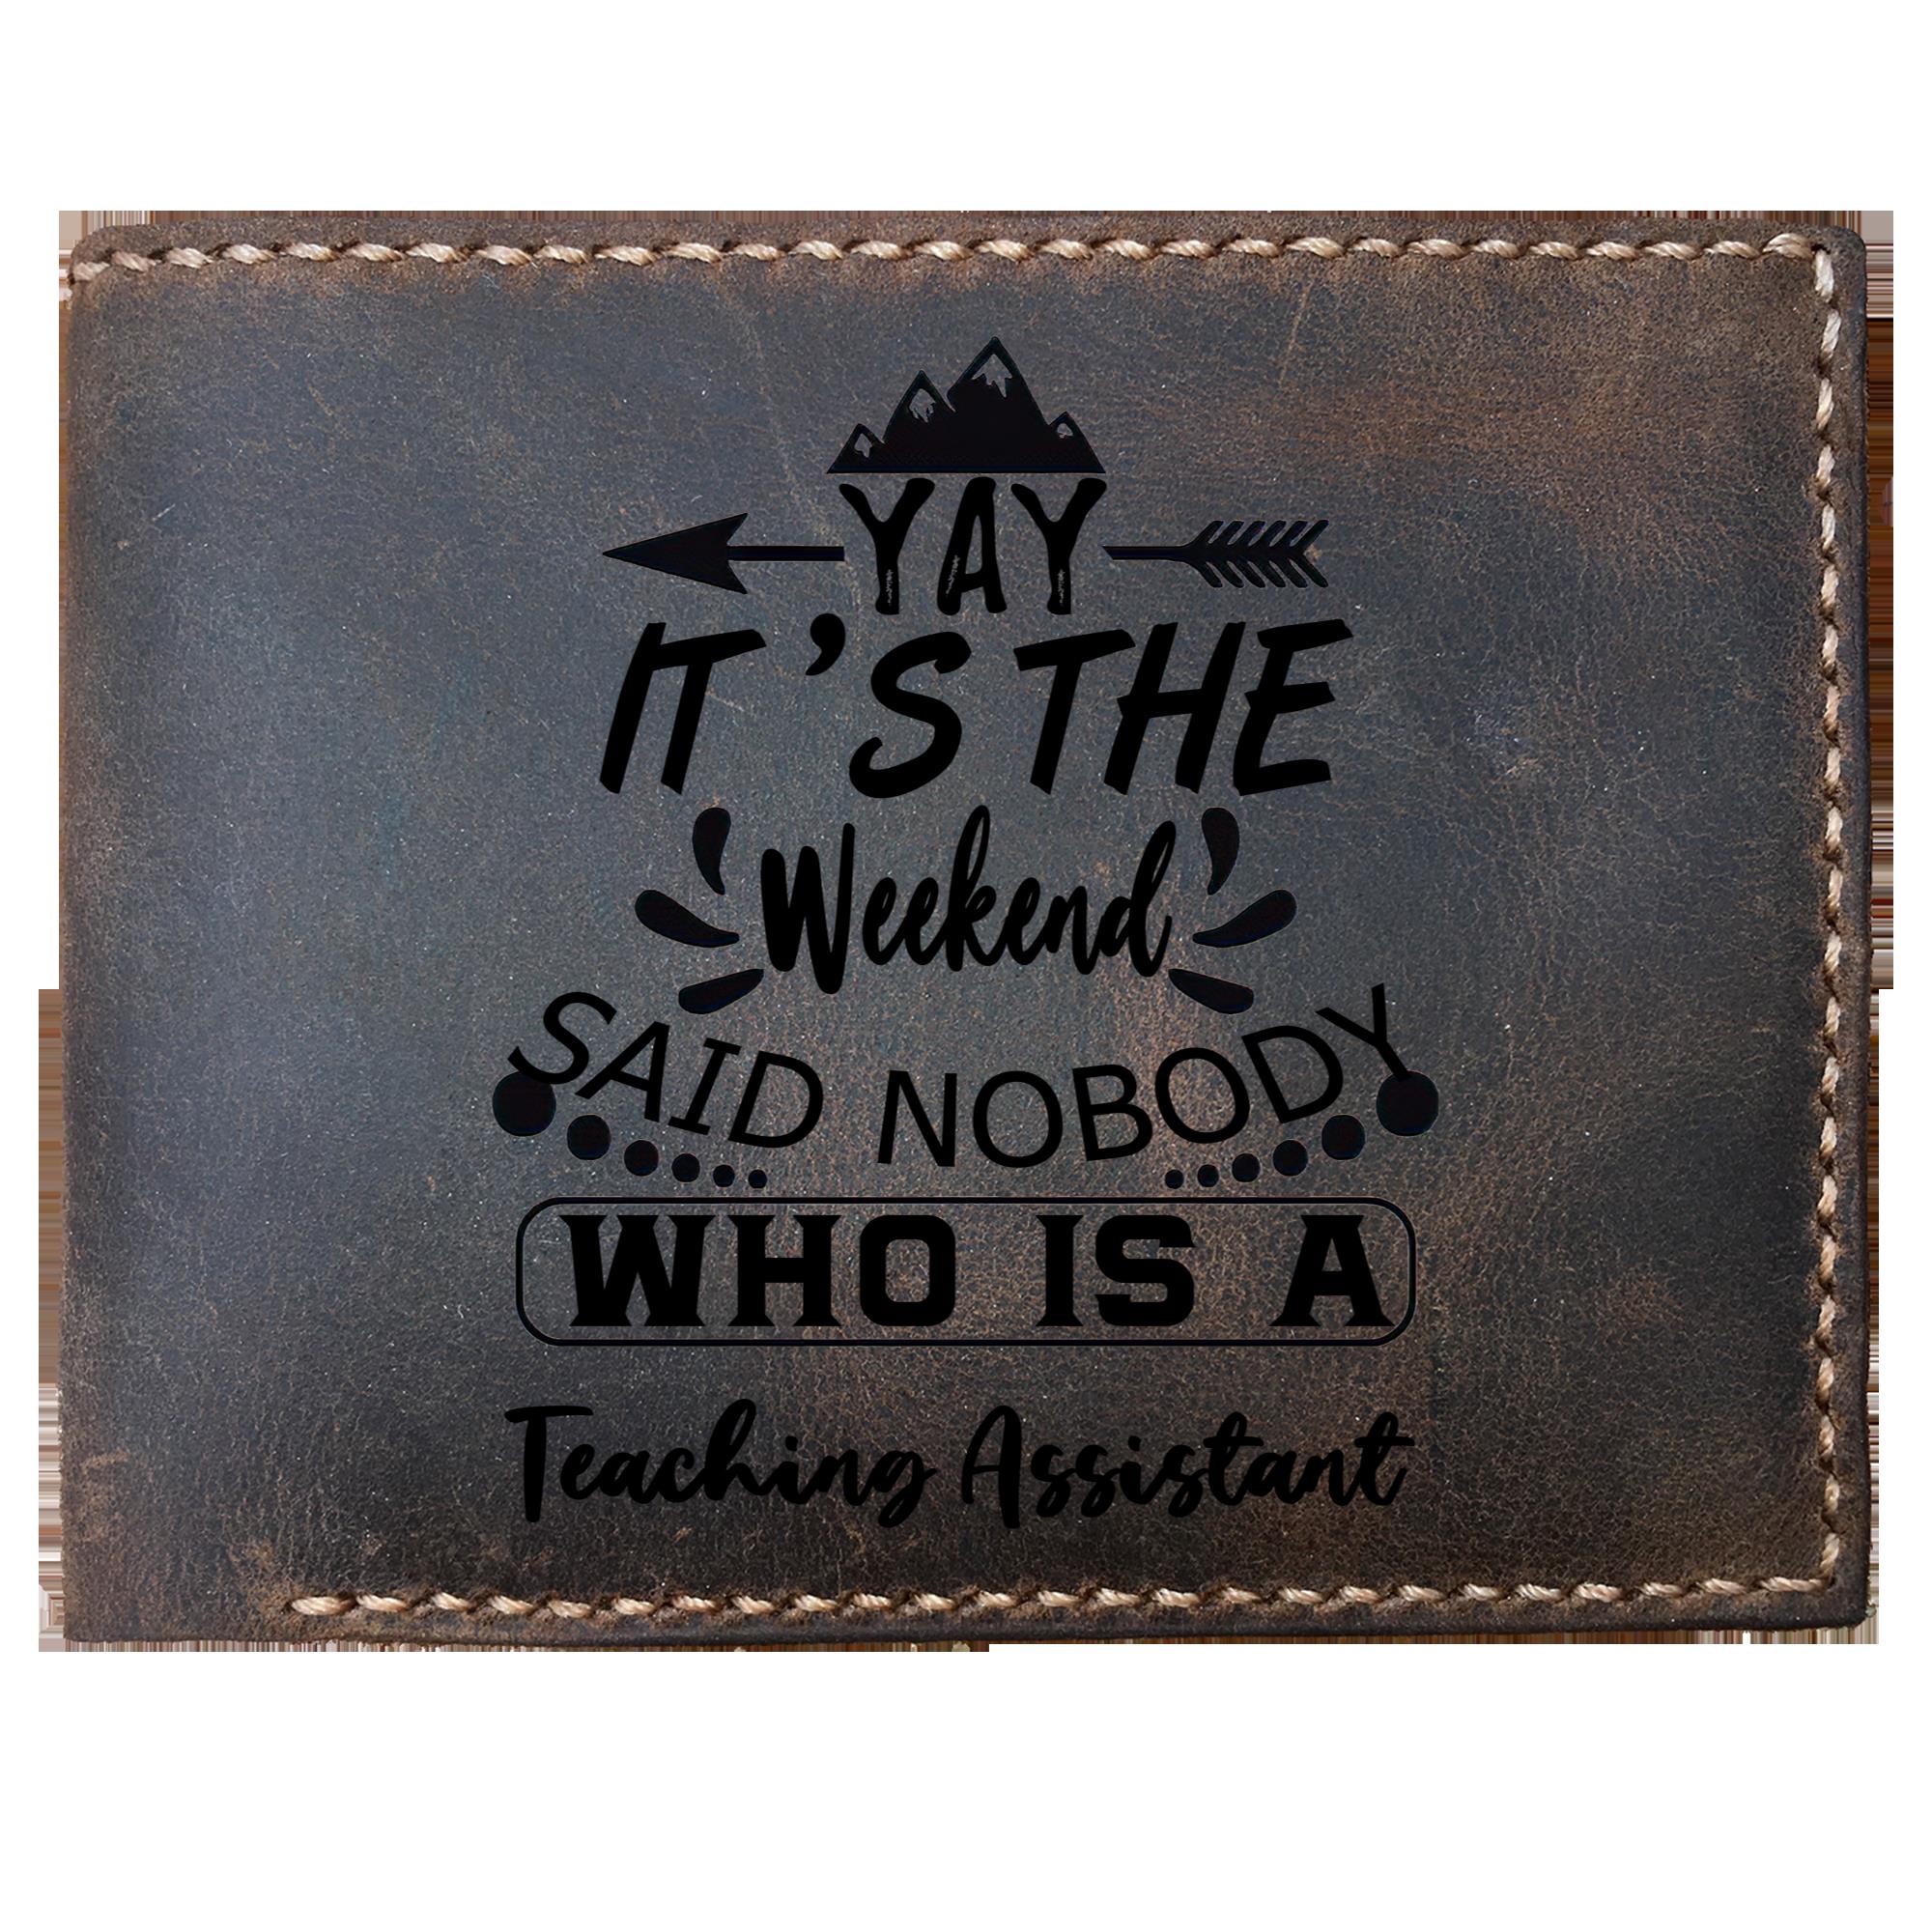 Skitongifts Funny Custom Laser Engraved Bifold Leather Wallet For Men, It's The Weekend Said Nobody Who Is A Teaching Assistant, Father's Day Gifts